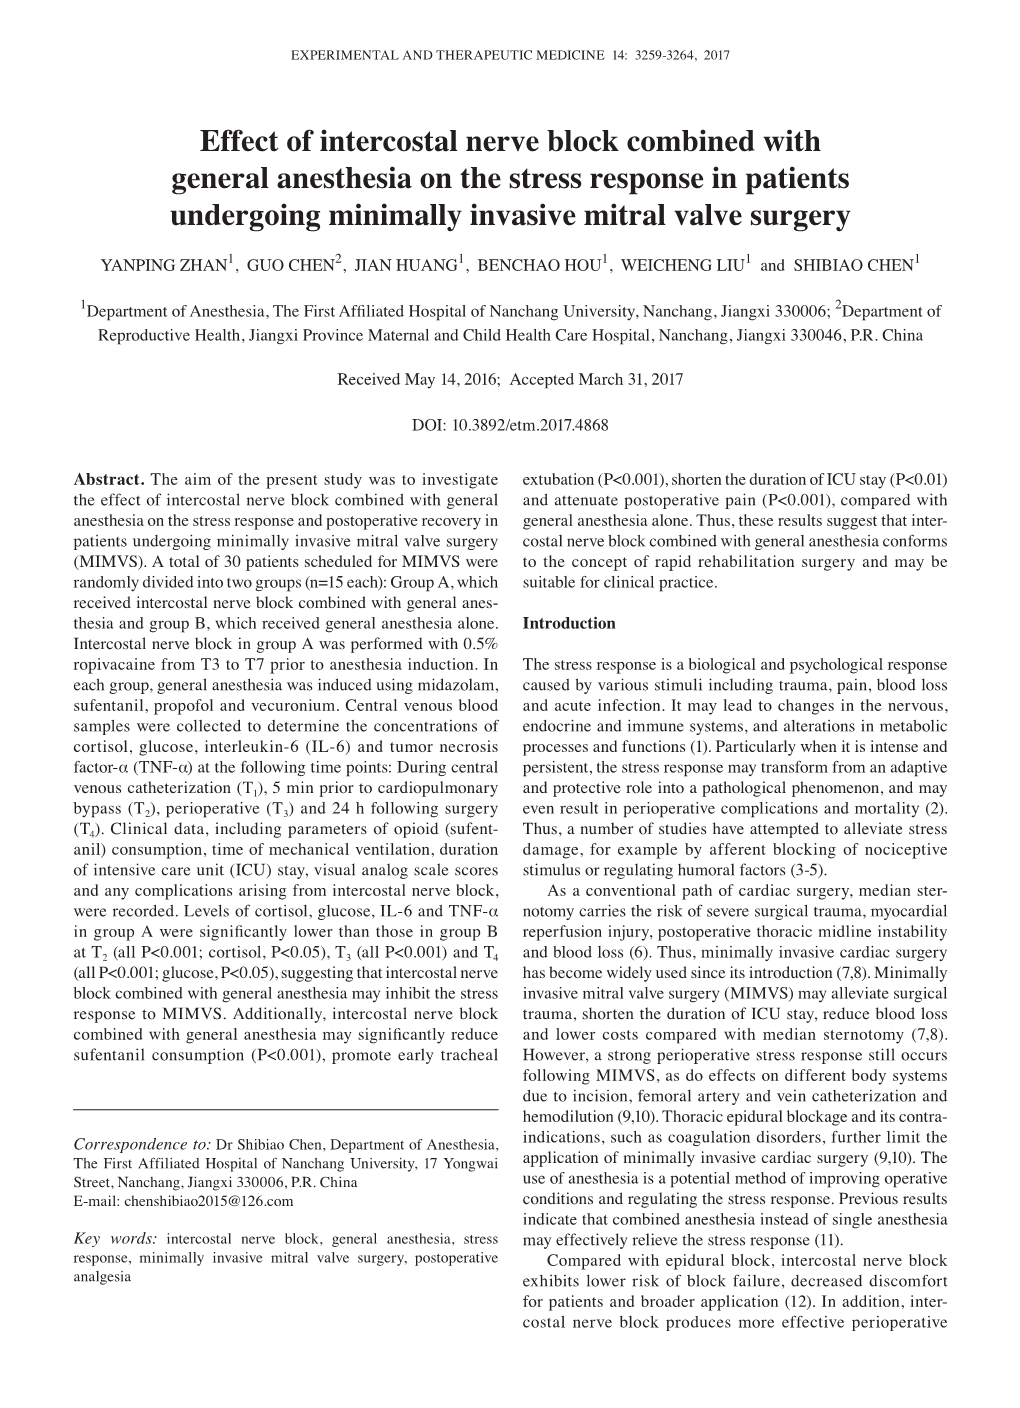 Effect of Intercostal Nerve Block Combined with General Anesthesia on the Stress Response in Patients Undergoing Minimally Invasive Mitral Valve Surgery